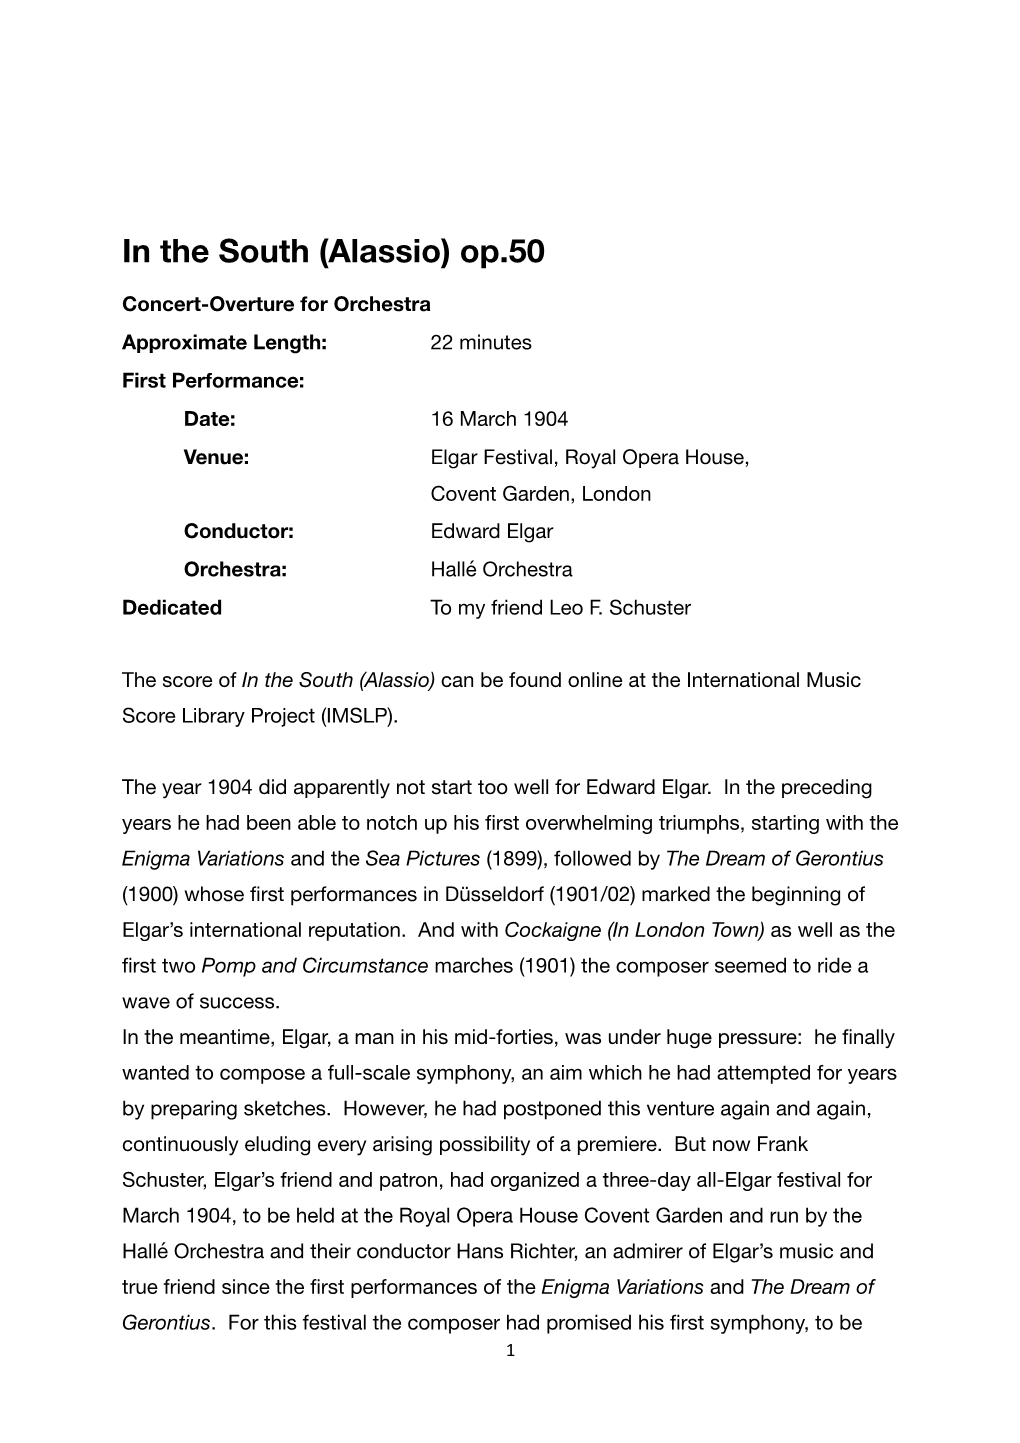 In the South, Prog Note, Michael Schwalb